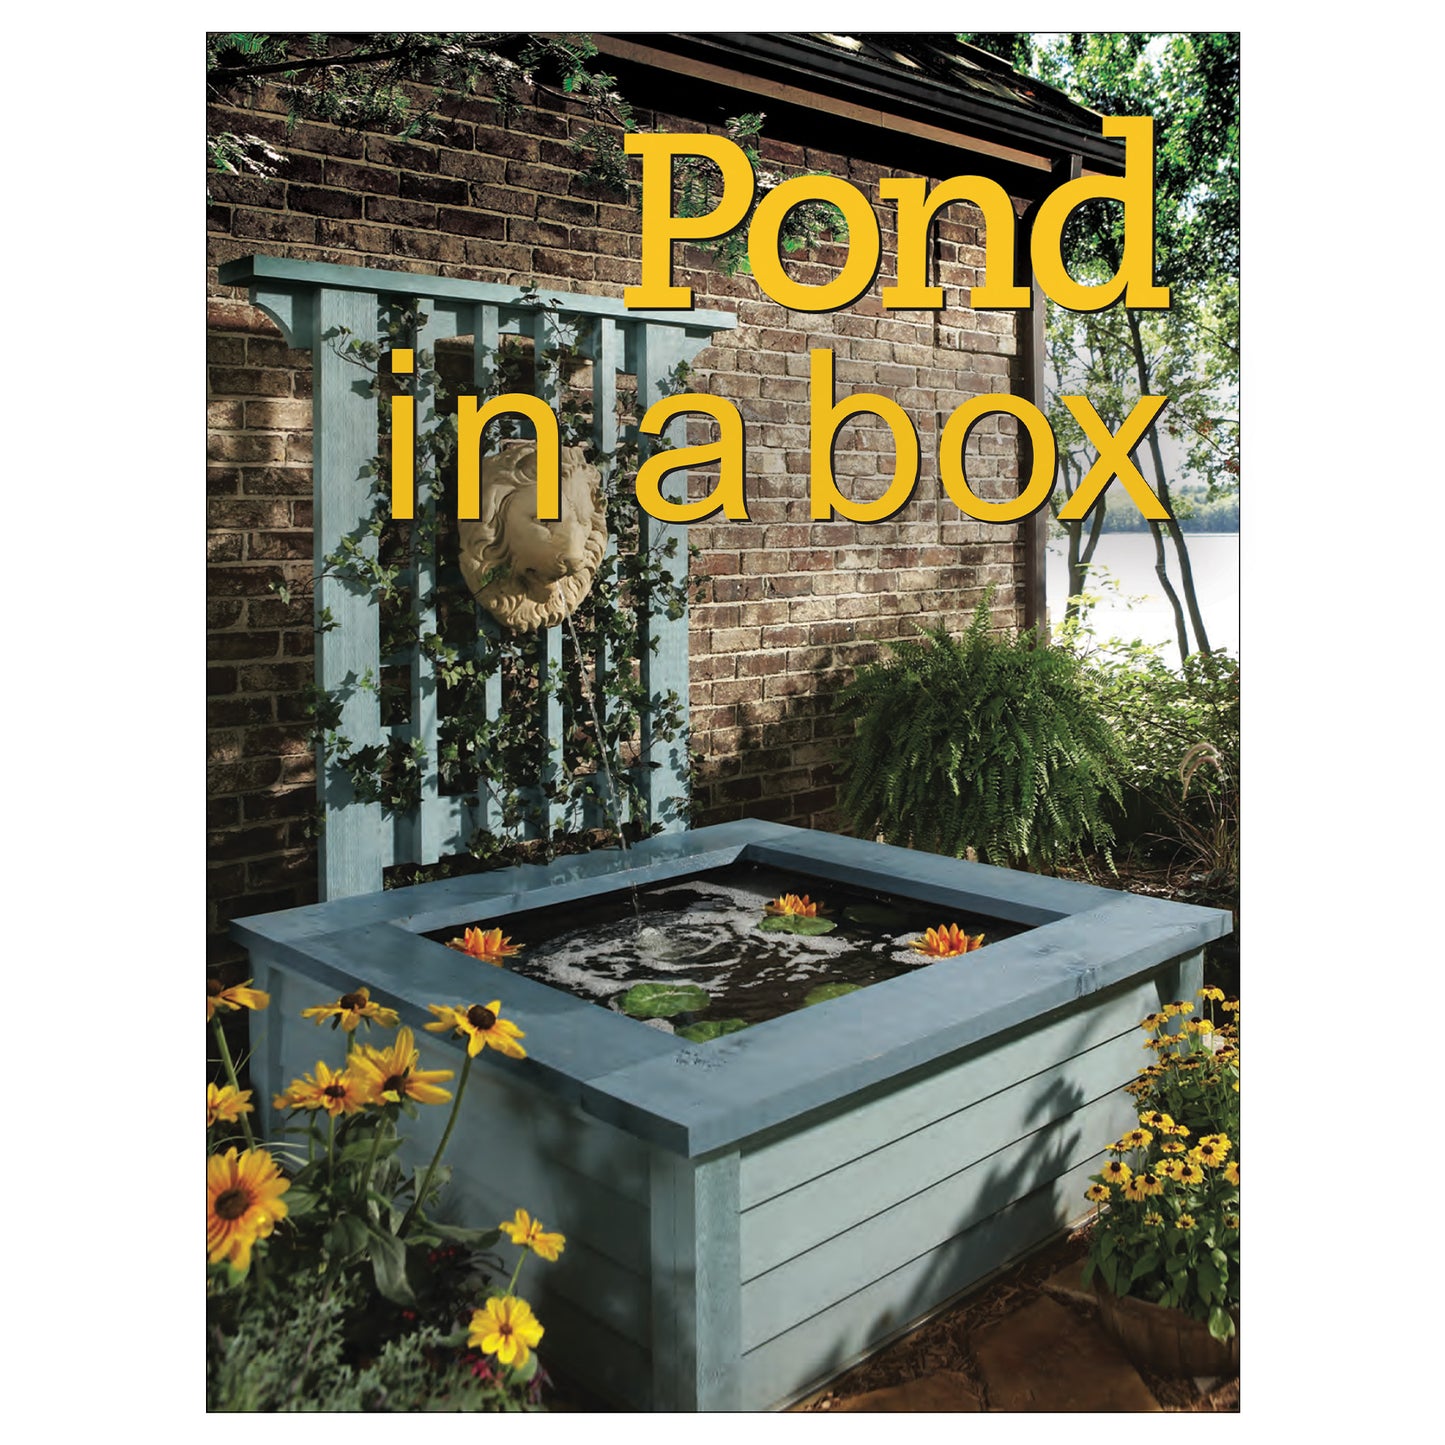 Pond in a Box